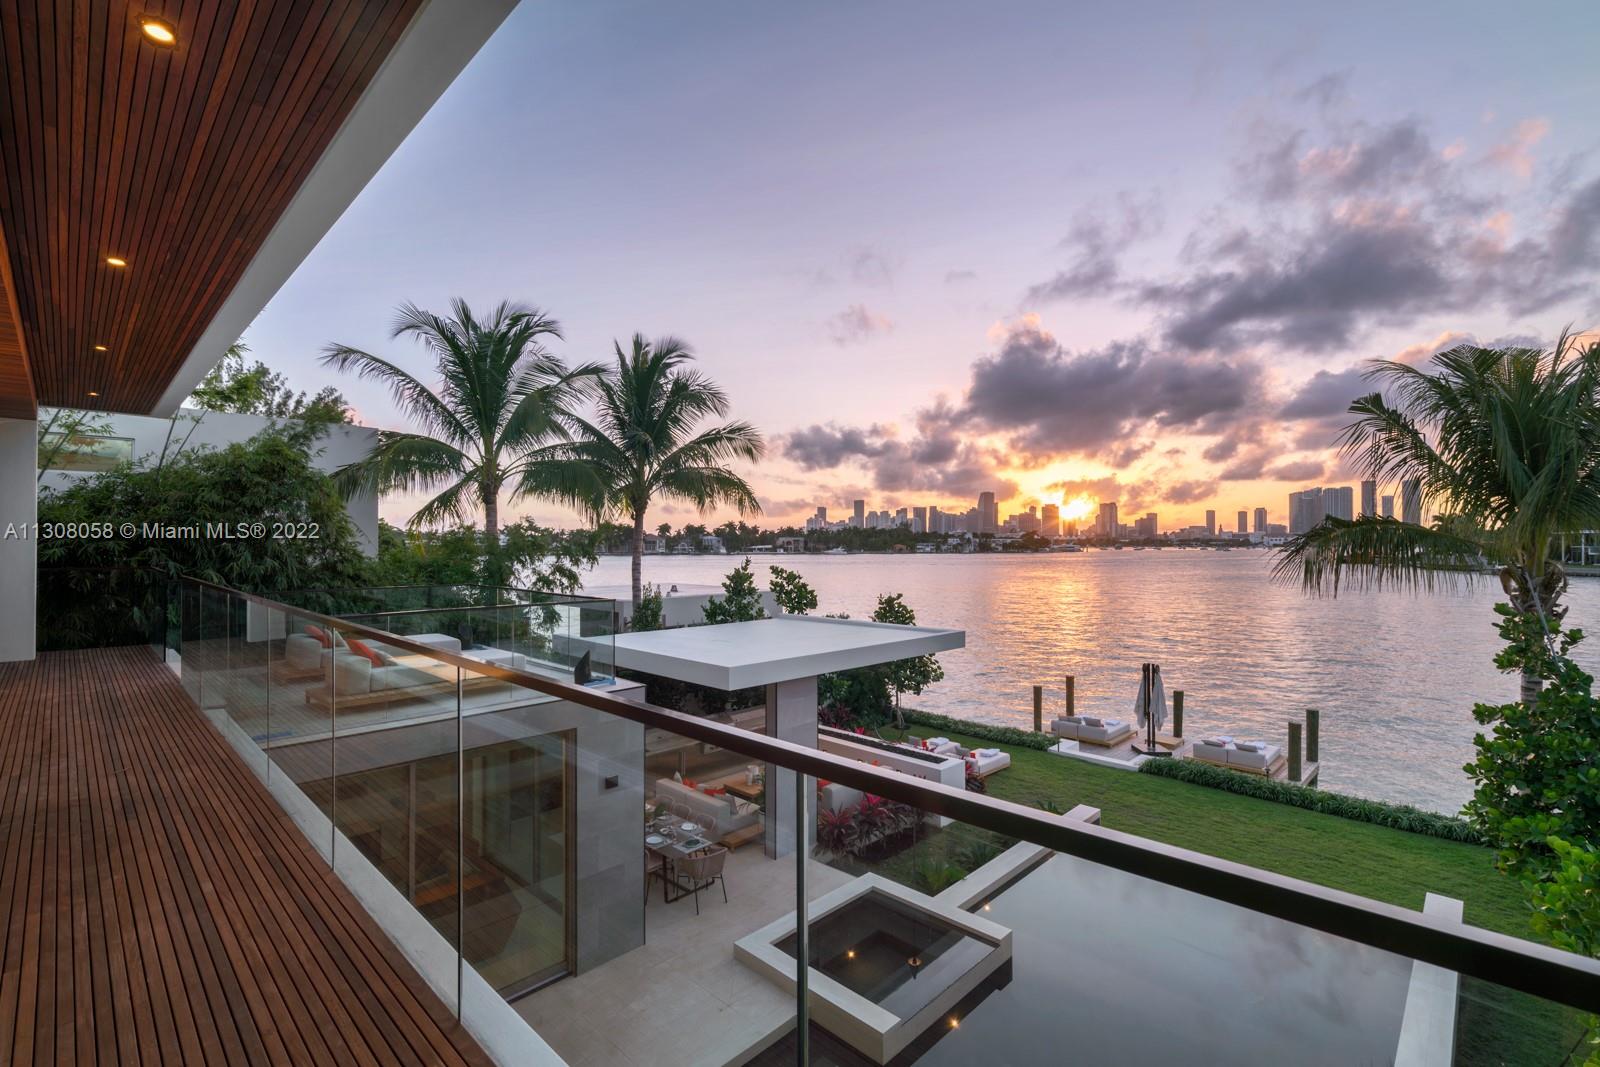 Direct Downtown Skyline Views from this West-facing newly built home. A Modern contemporary Masterpiece on the Venetian Islands. Interiors feature five oversized bedroom suites, open Boffi kitchen, theatre room, high-end European finishes and smart home technology. The outdoor area is perfect for entertaining with a summer kitchen, lounge, dining, gas fire feature, large heated swimming pool with spa and private dock. Endless views, direct bay access and an amazing location make this one of the most important homes on the Venetian Islands.